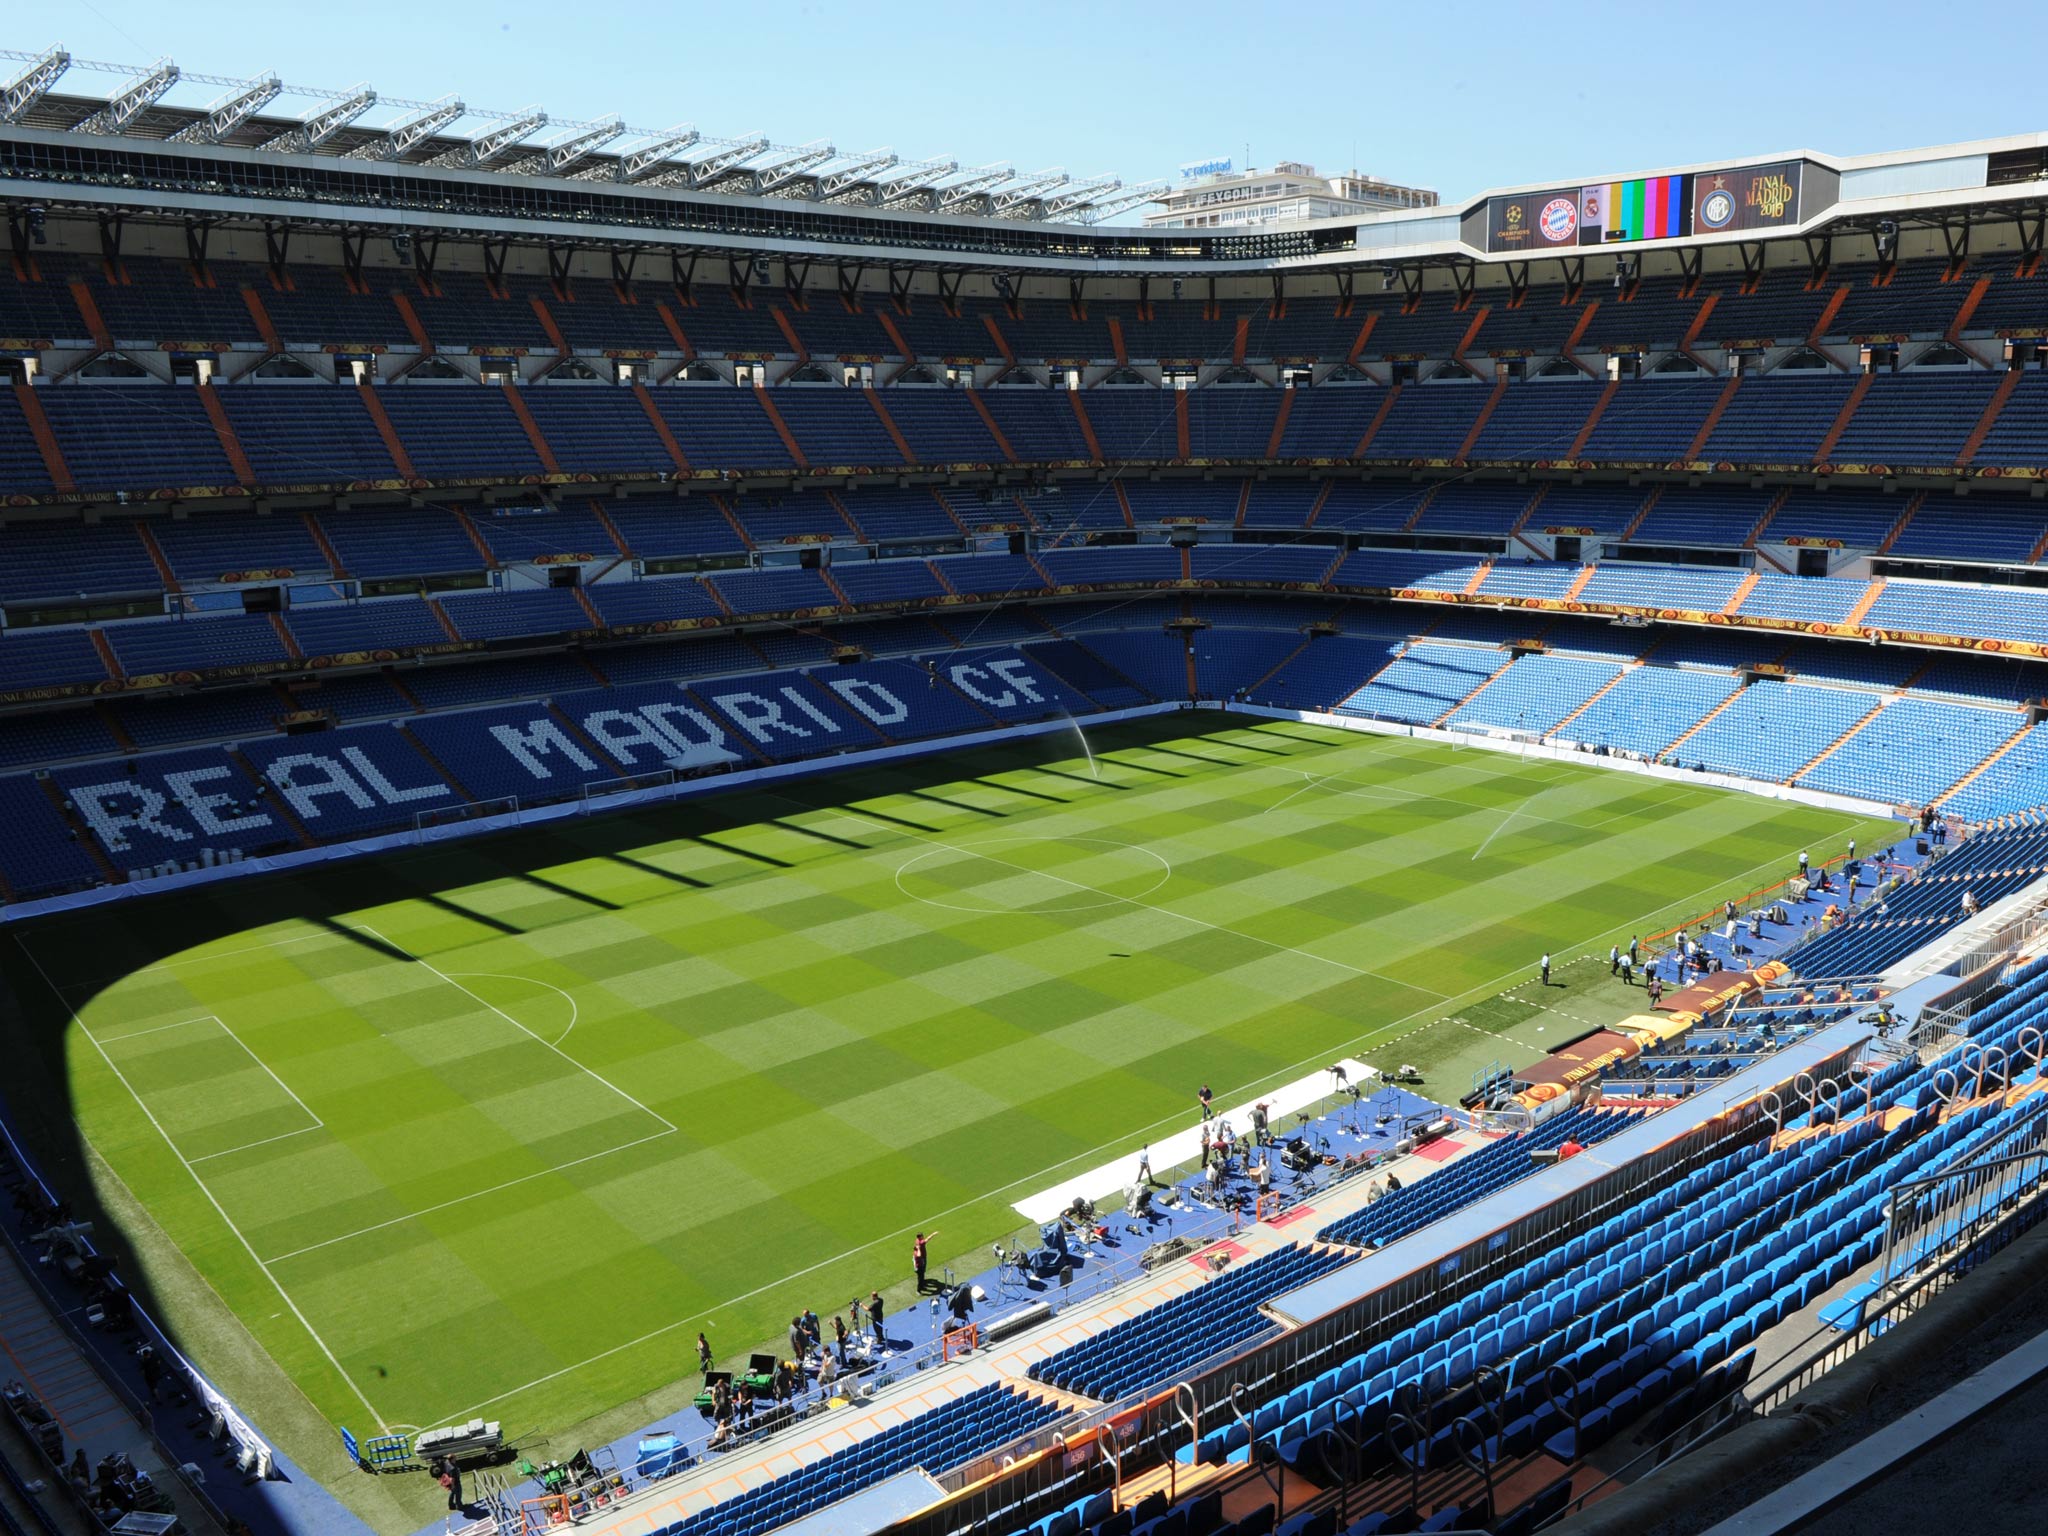 Real and Madrid City Council allegedly agreed a favourable deal for land around the Bernabeu stadium